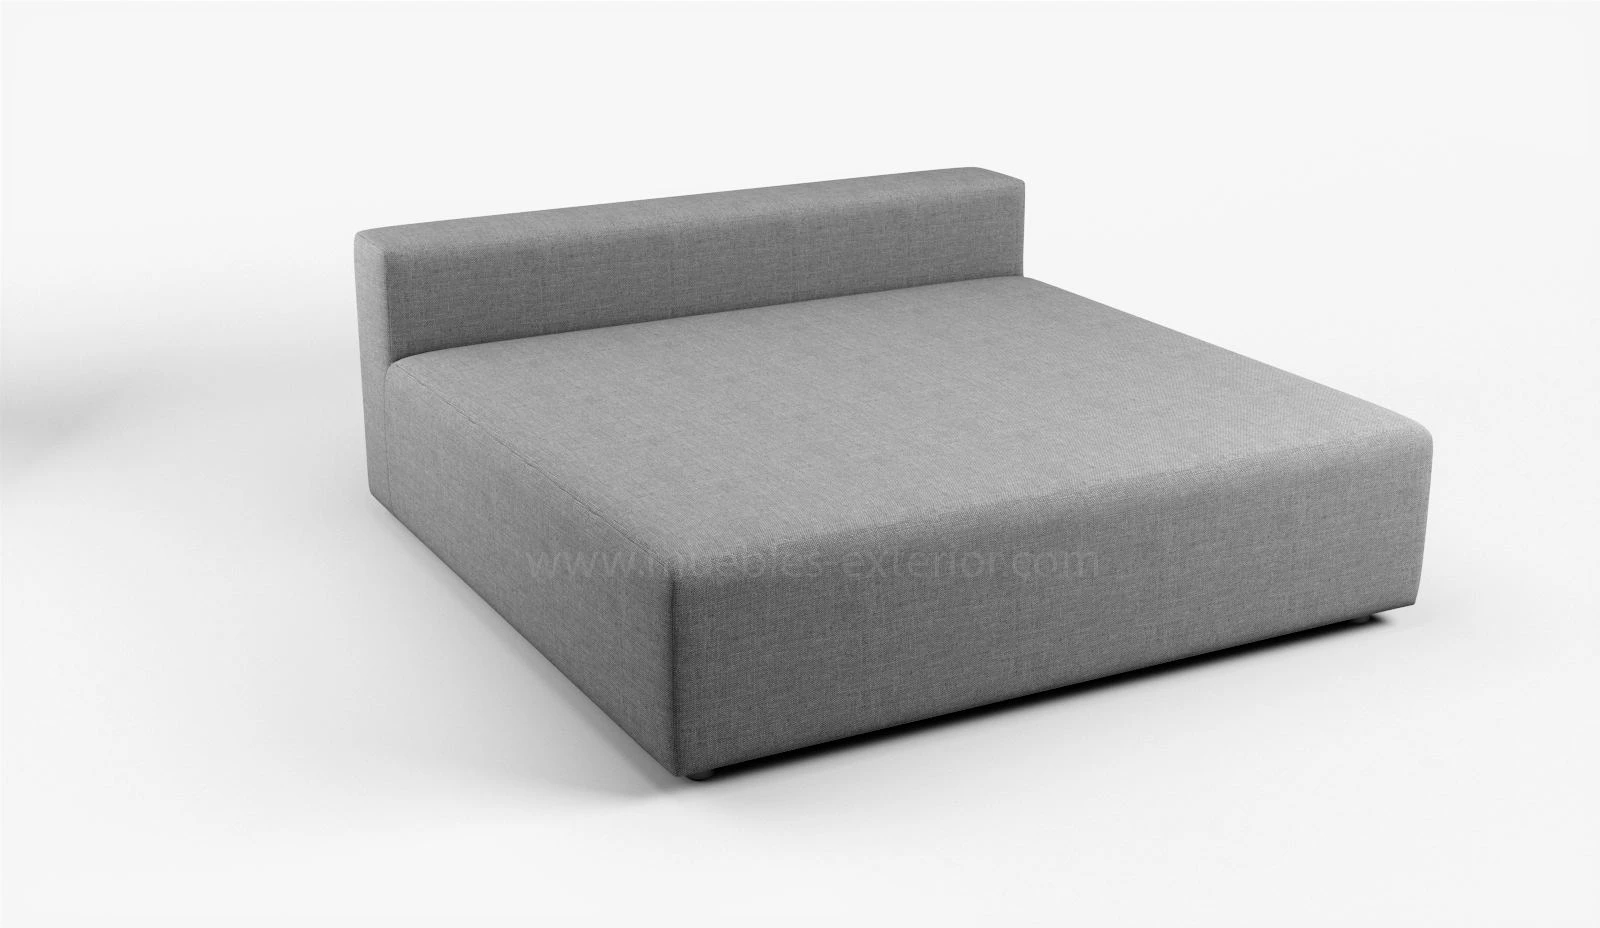 Modulo Central Cubic LOUNGE 154 x 154 tela impermeable